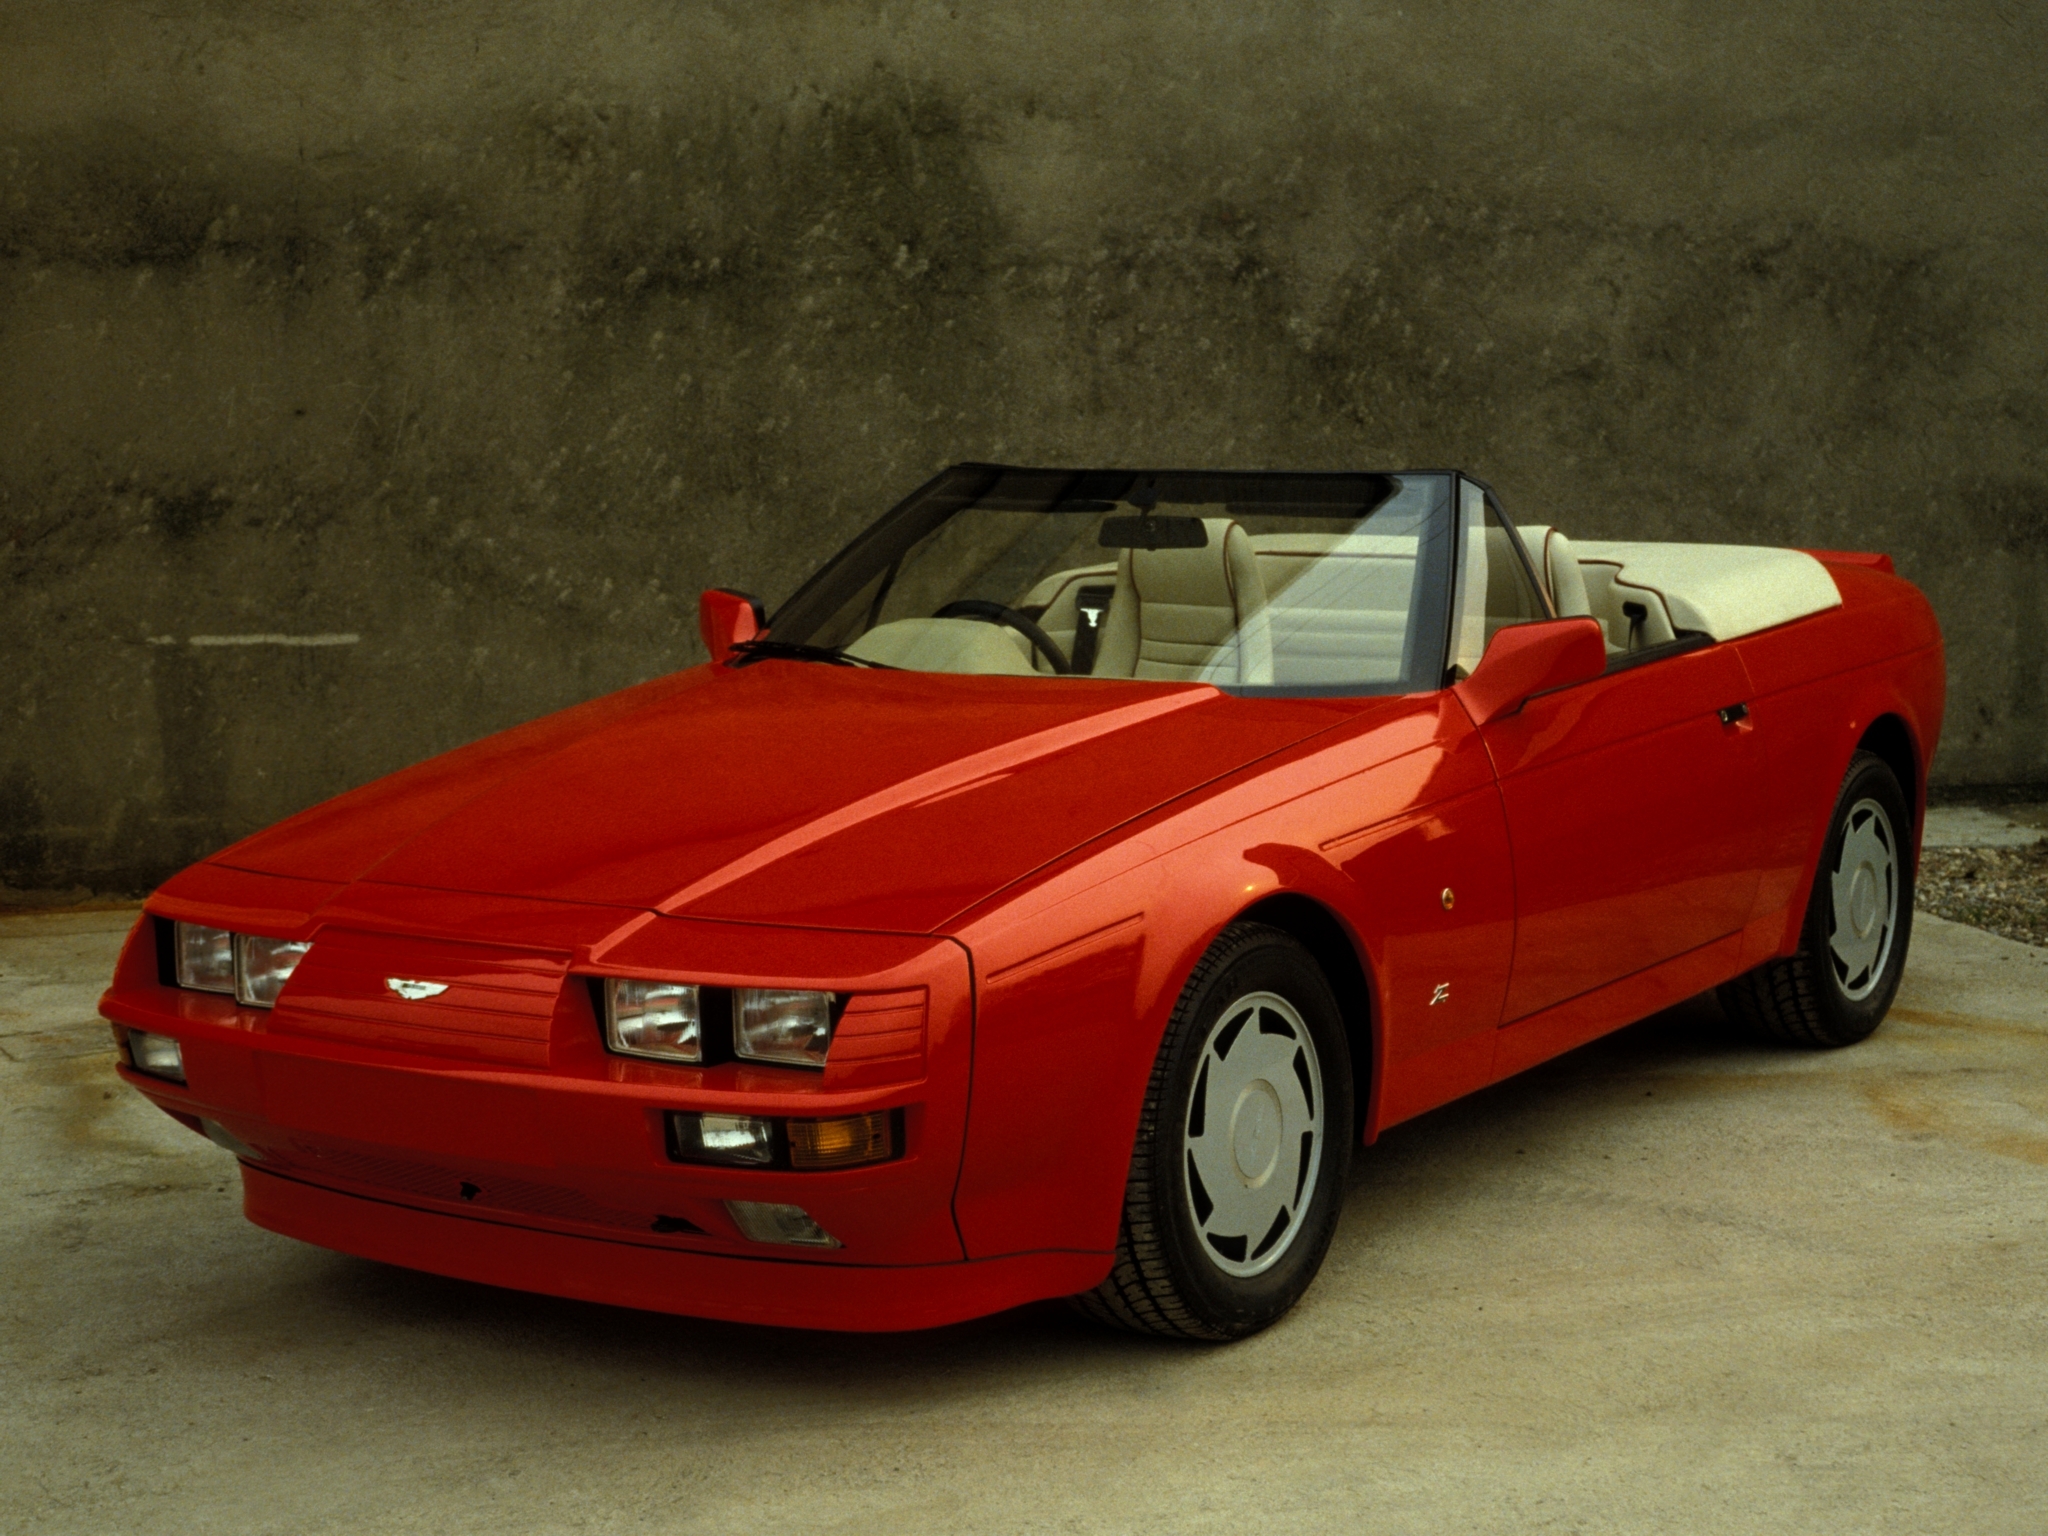 aston martin, cars, red, front view, style, cabriolet, v8, volante, 1988